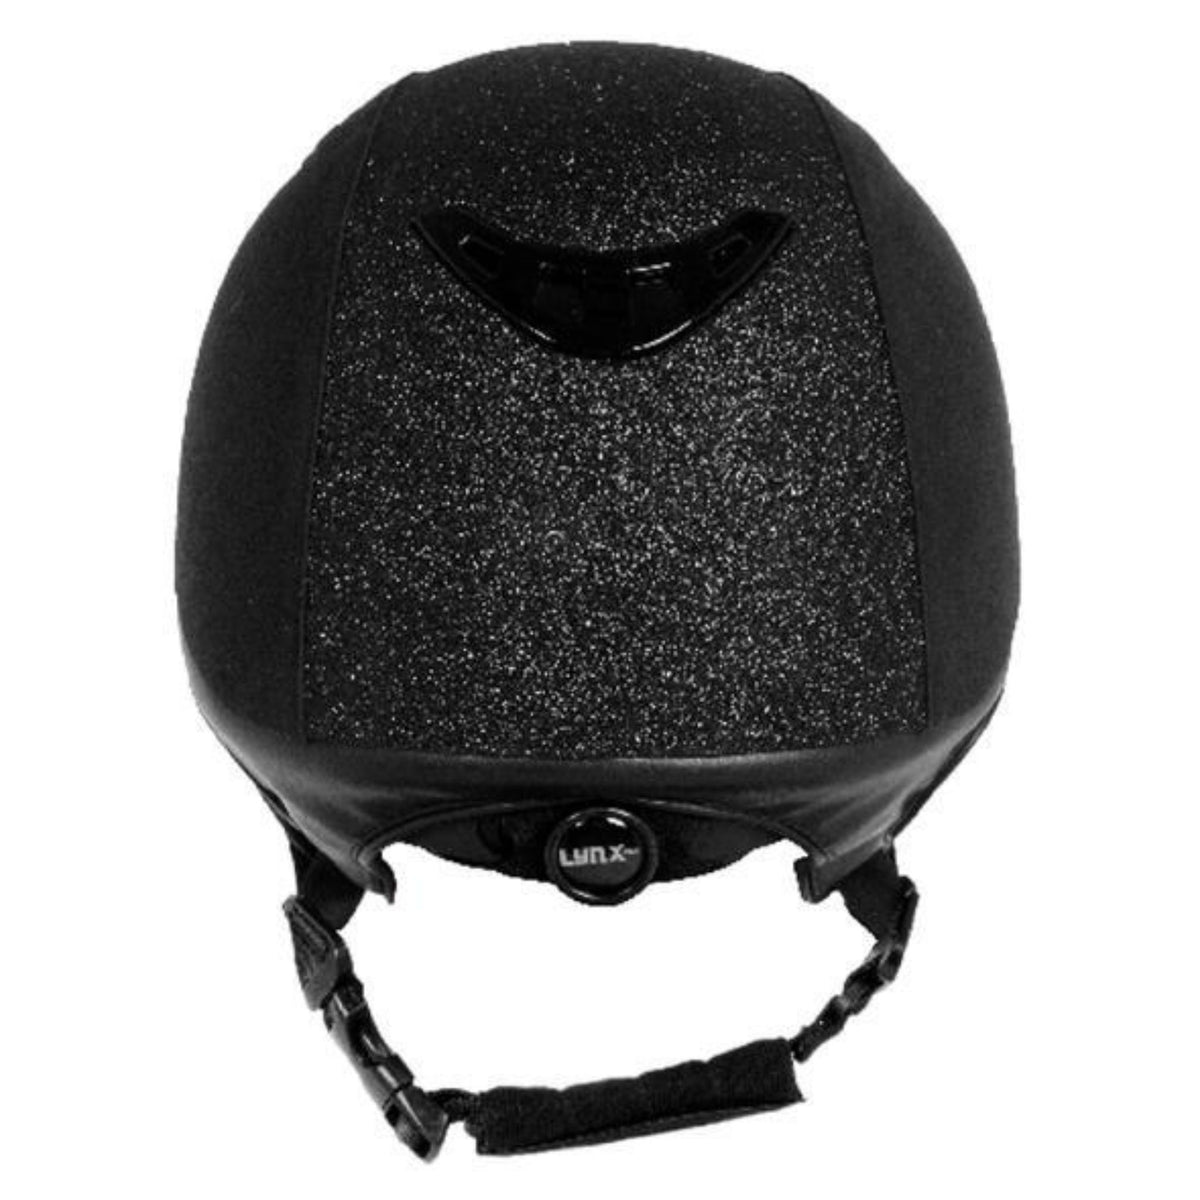 Back of black microfiber helmet with large glittery textured section.